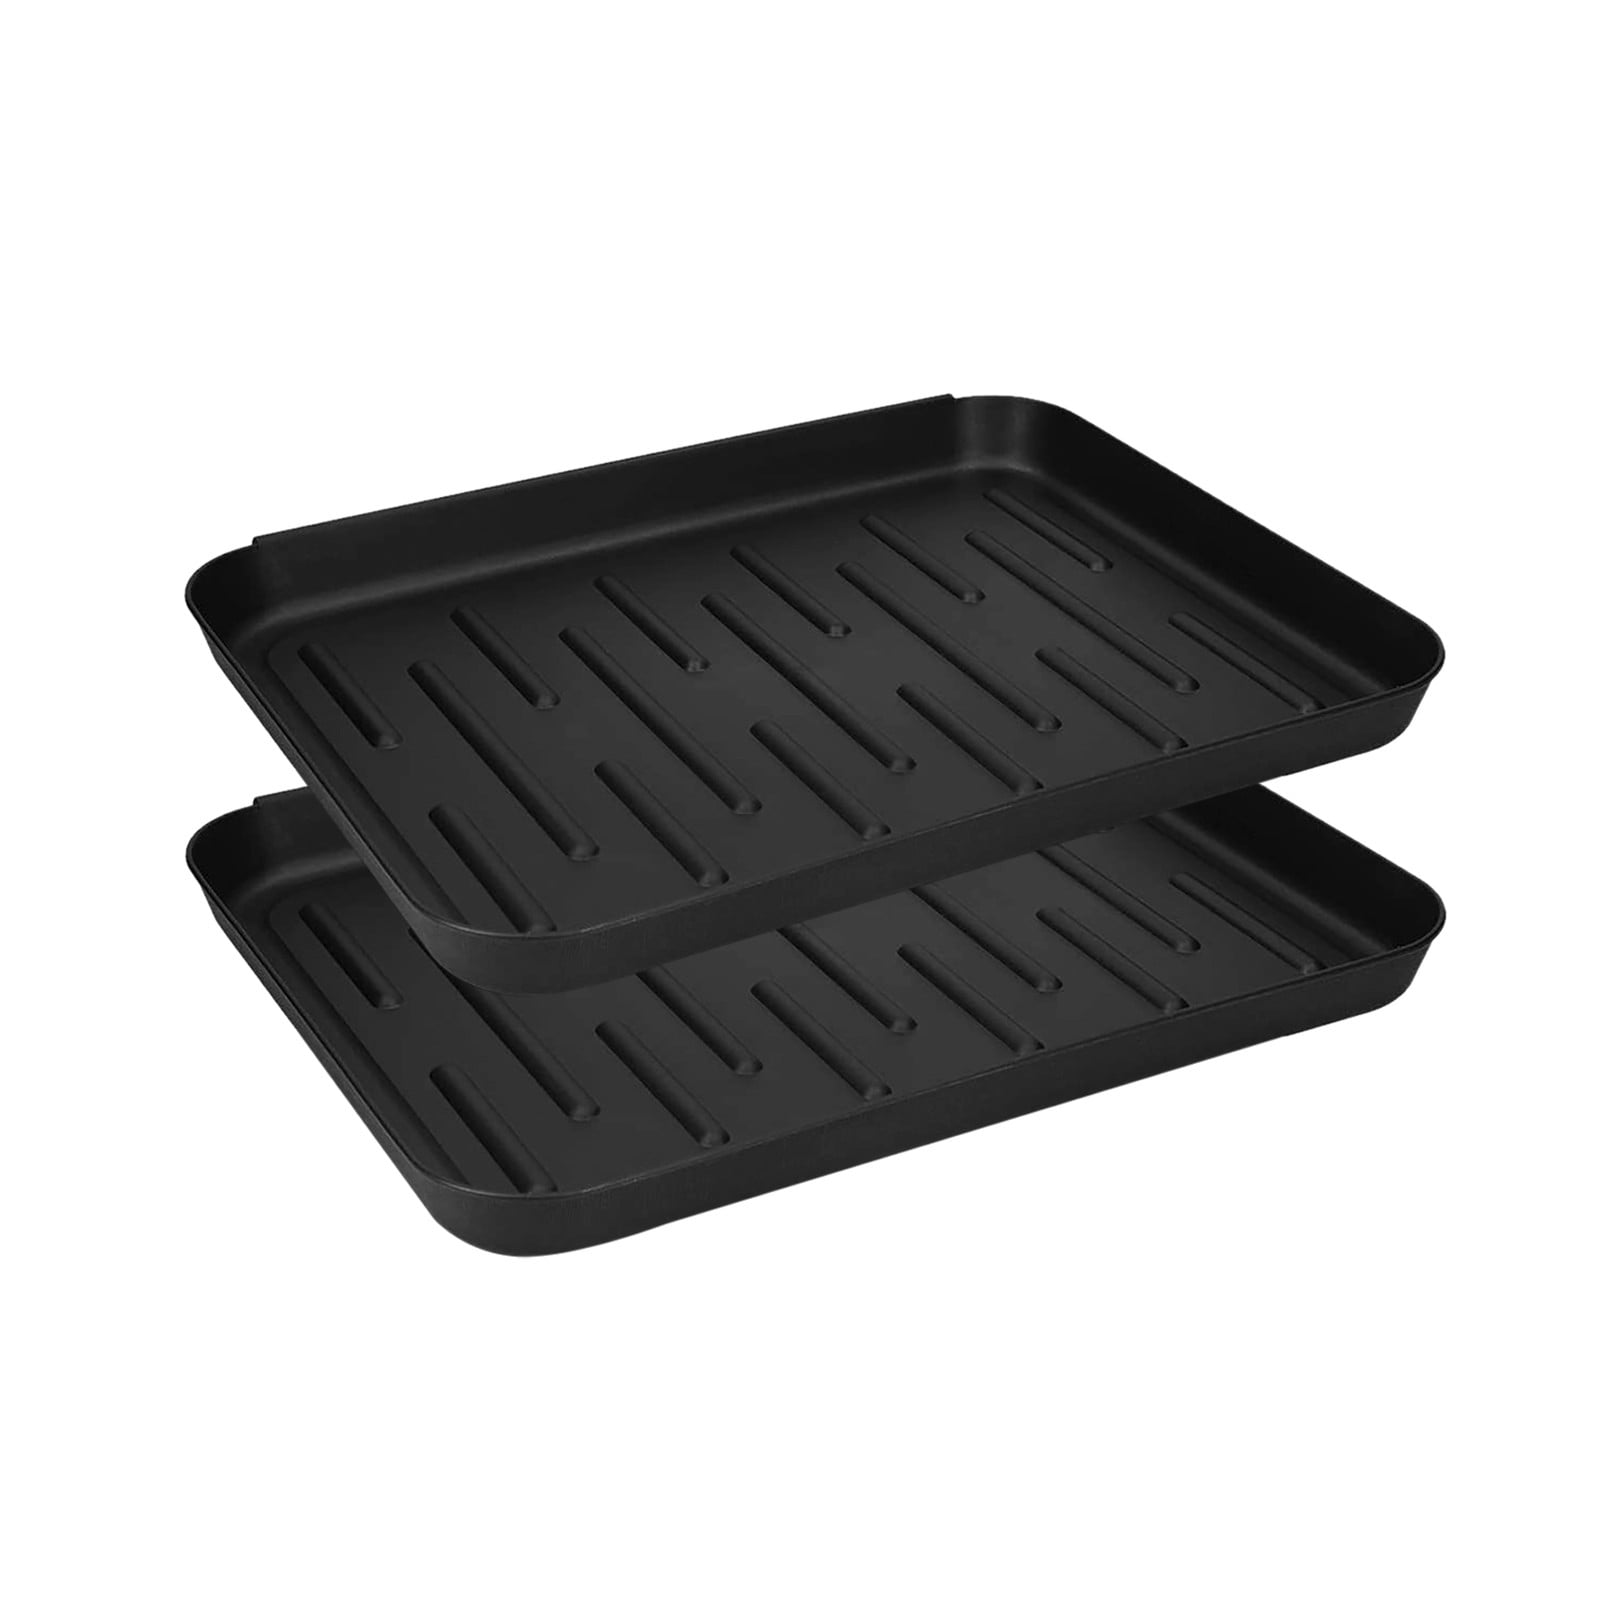 BBA SUNRISE Rubber Boot Tray Wet Shoe Tray for Entryway Indoor